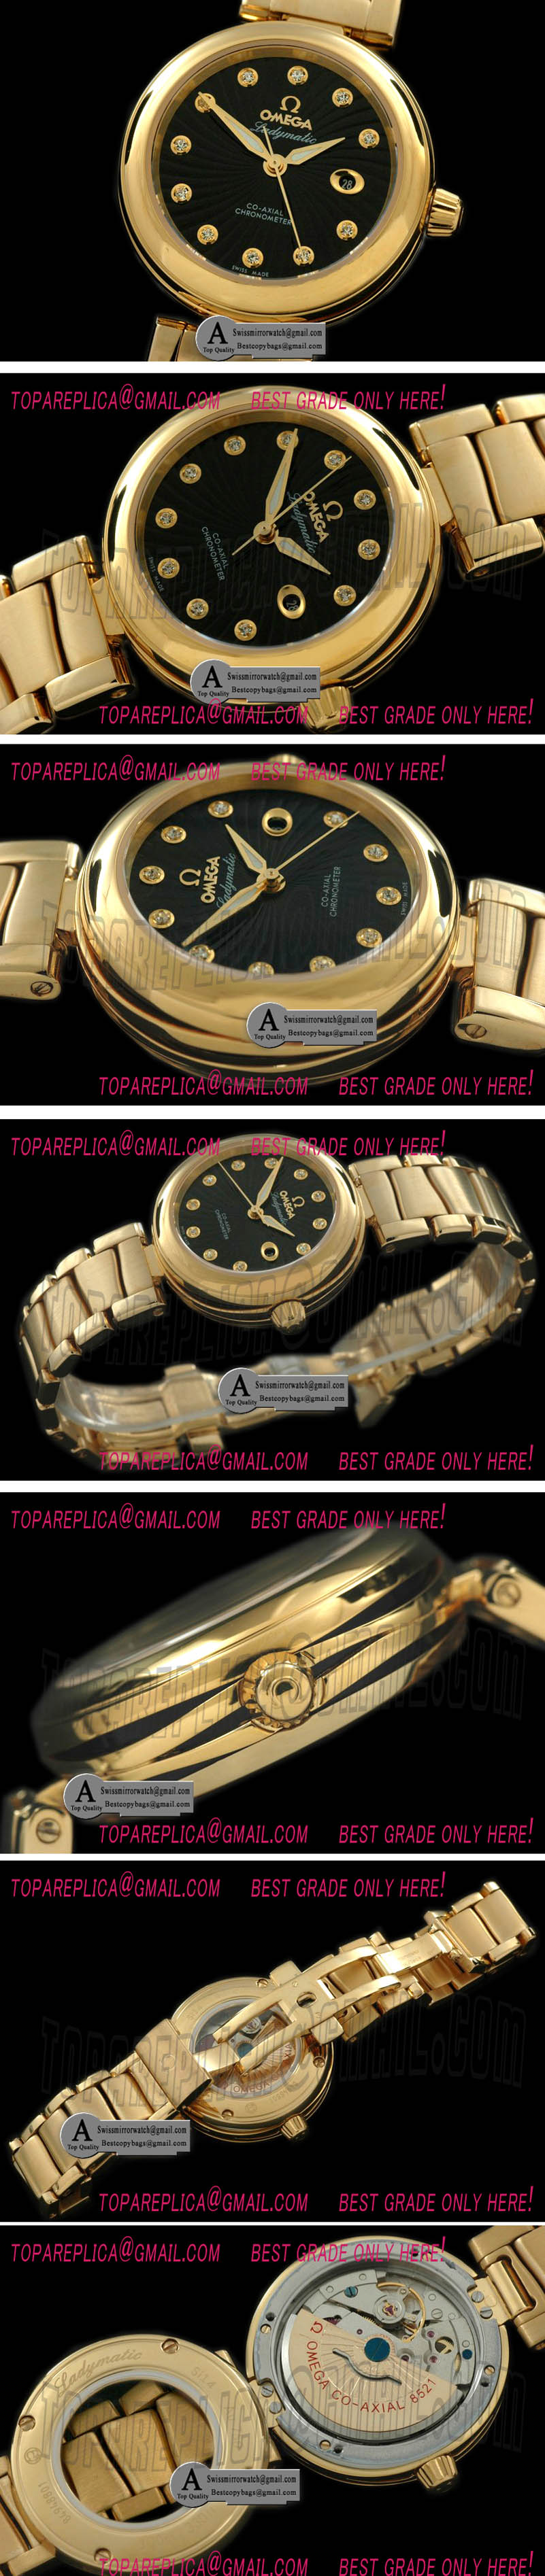 Omega Deville Ladymatic Mid Yellow Gold/Yellow Gold Black 2813 21J Replica Watches